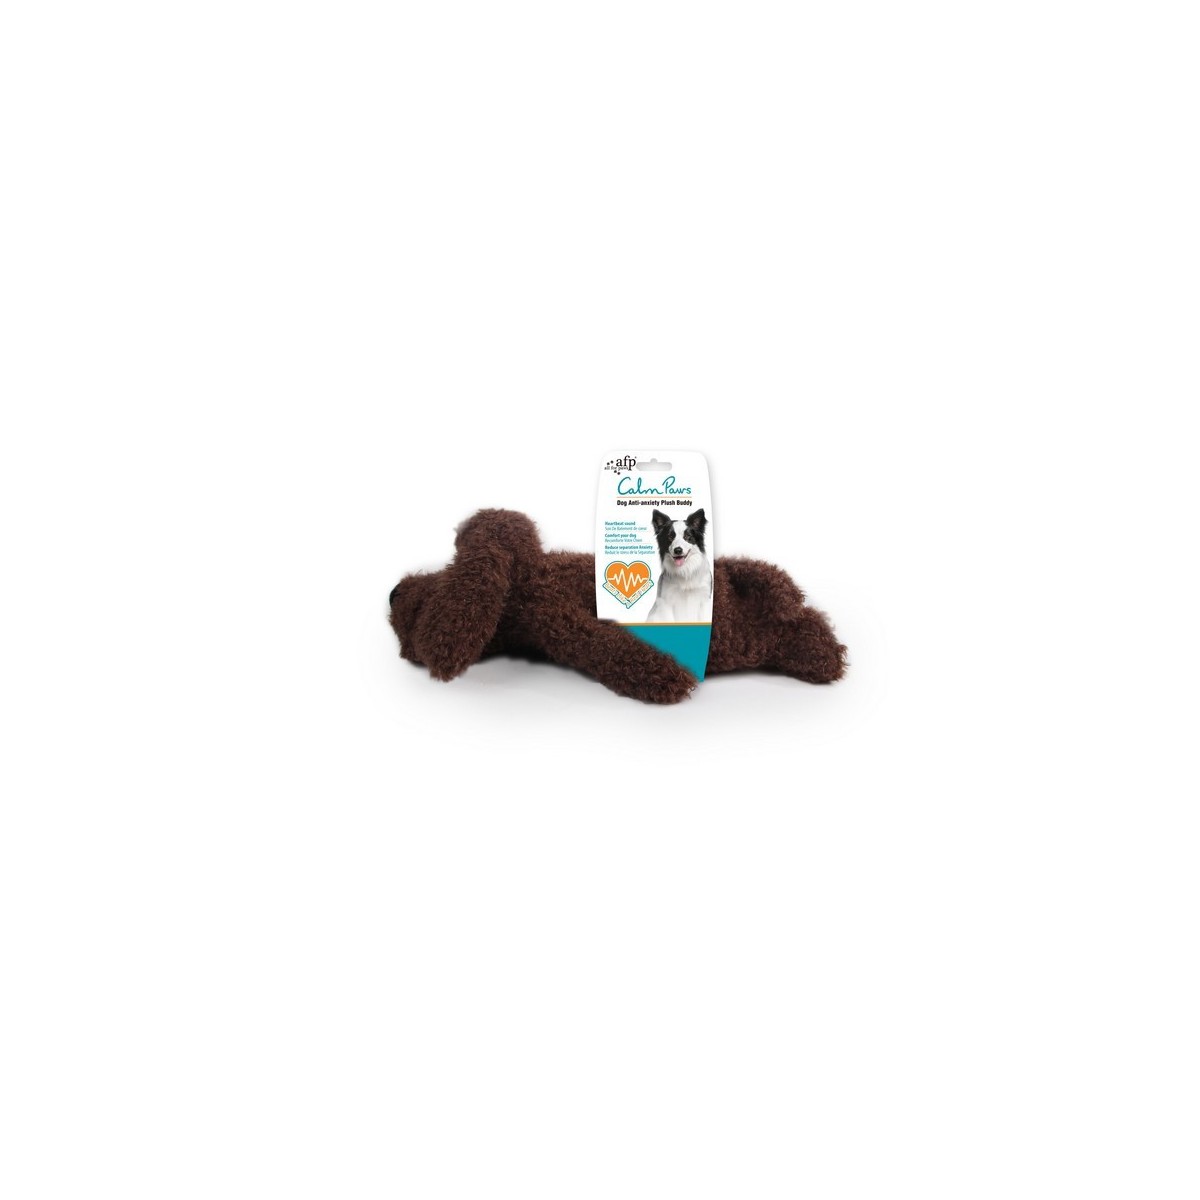 https://thepetcabin.store/2261-product_zoom/all-for-paws-dog-anti-anxiety-plush-buddy.jpg